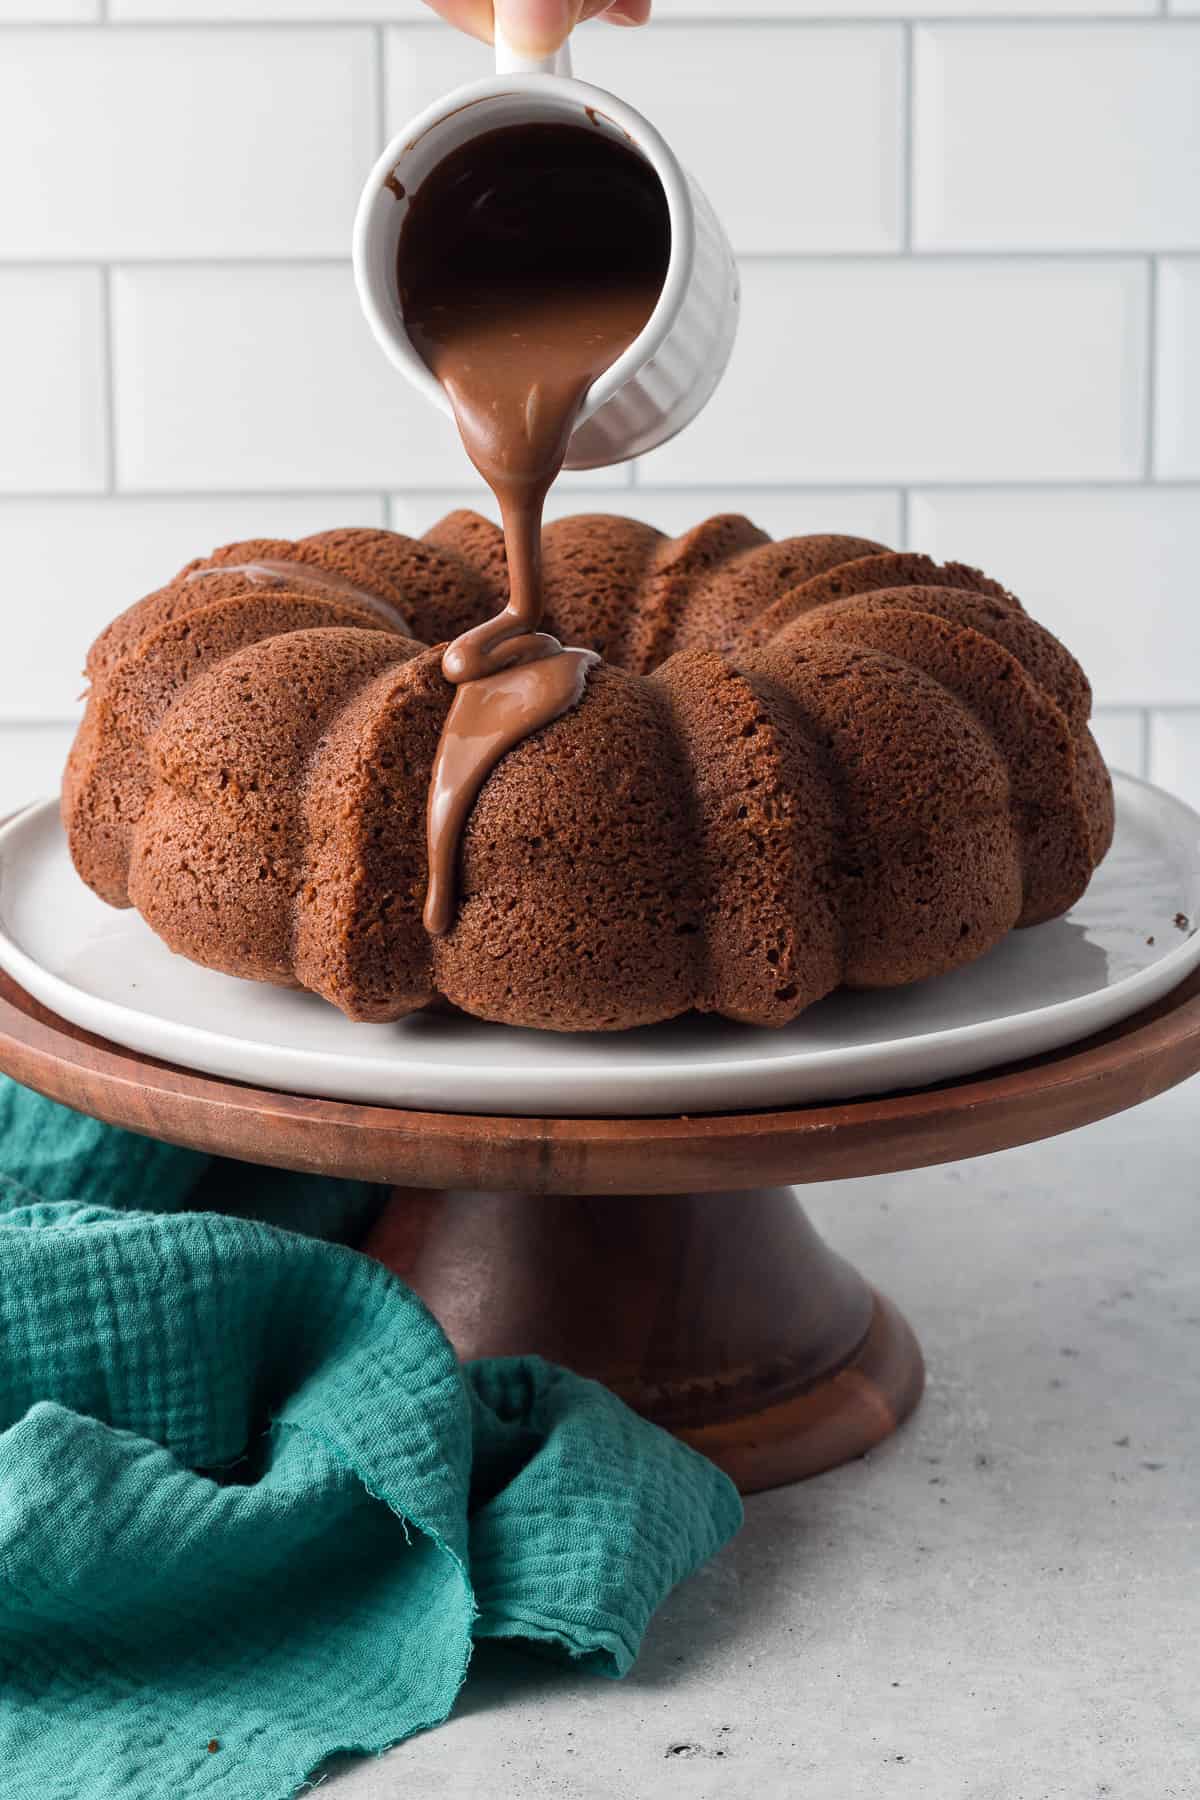 Chocolate kahlua glaze pouring from a white cup over a bundt cake on a cake pedestal.